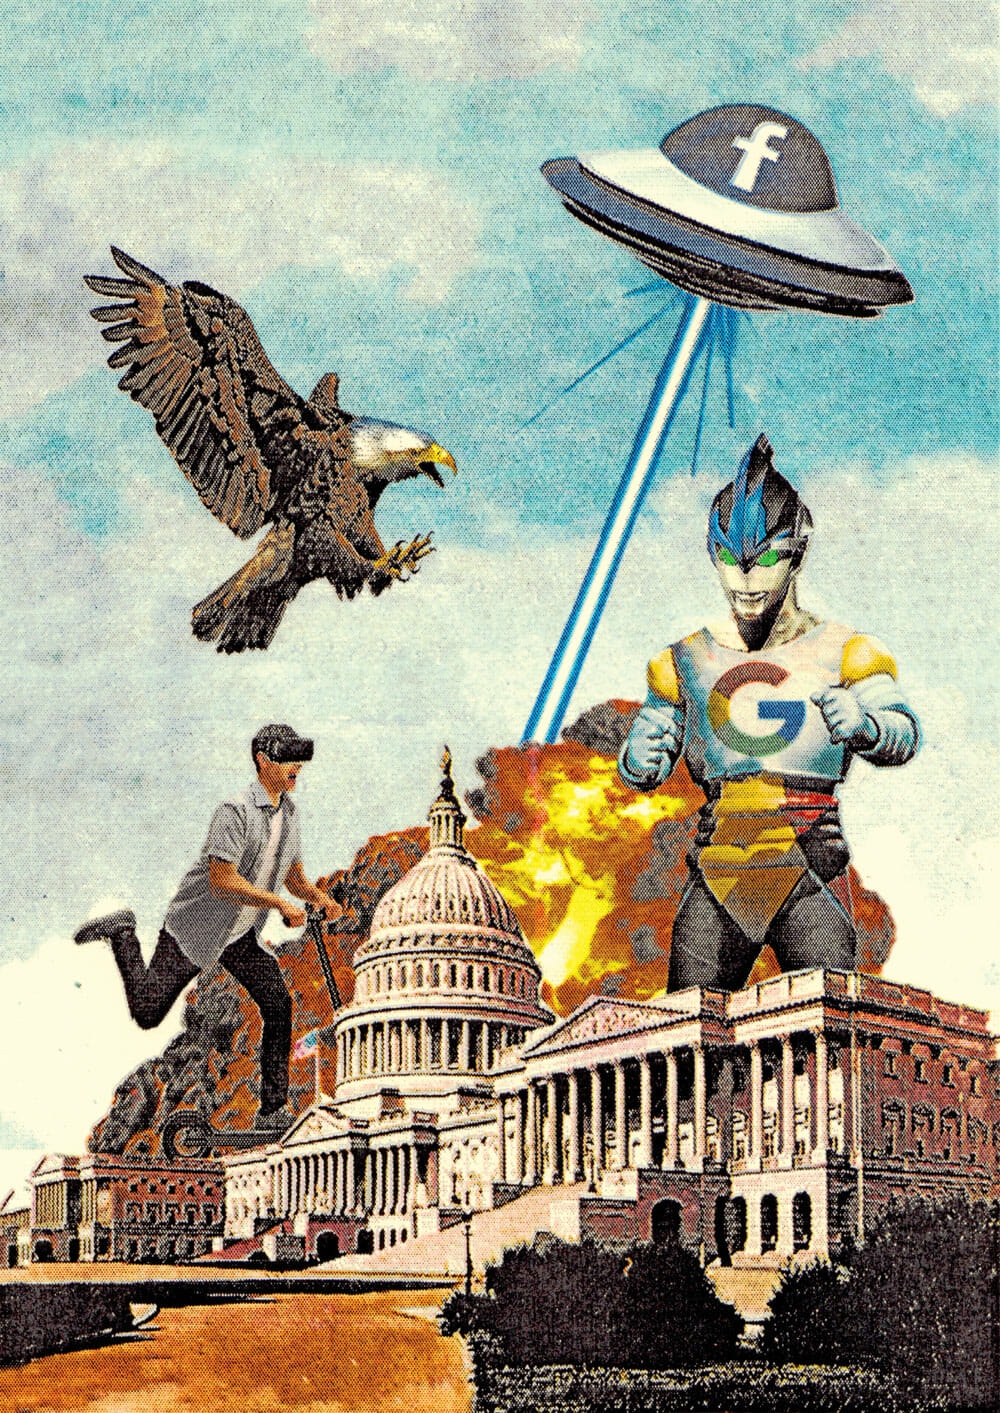 A flying saucer and a ten-story robot emblazoned with the Facebook and Google logos destroy the Capitol Building alongside a giant eagle and a man riding an electric scooter with virtual reality goggles. There are explosions.